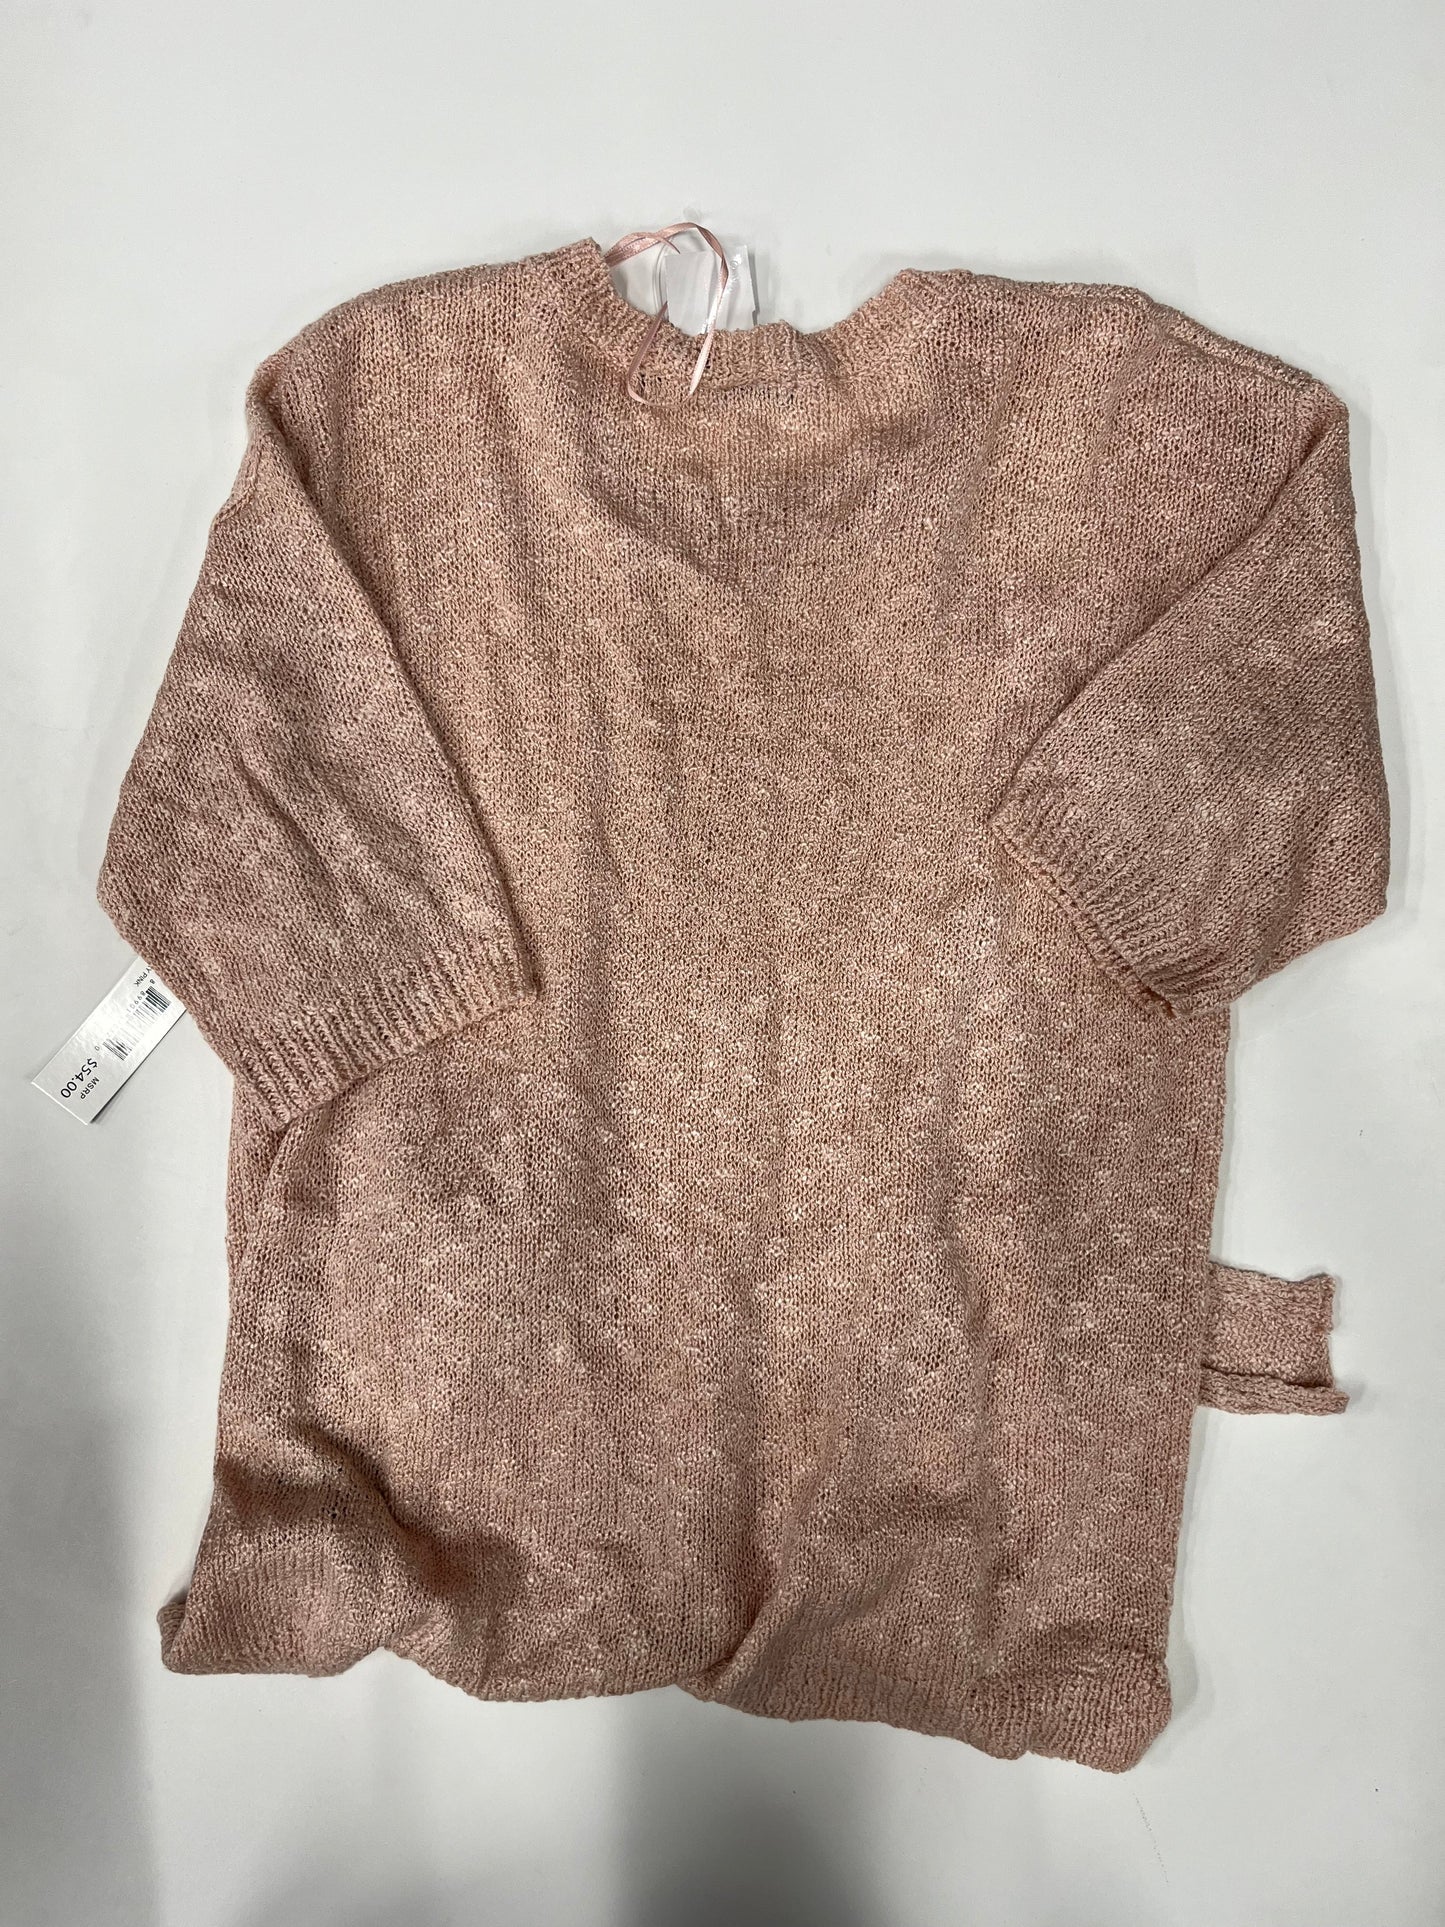 Sweater Short Sleeve By United States Sweaters NWT Size: M